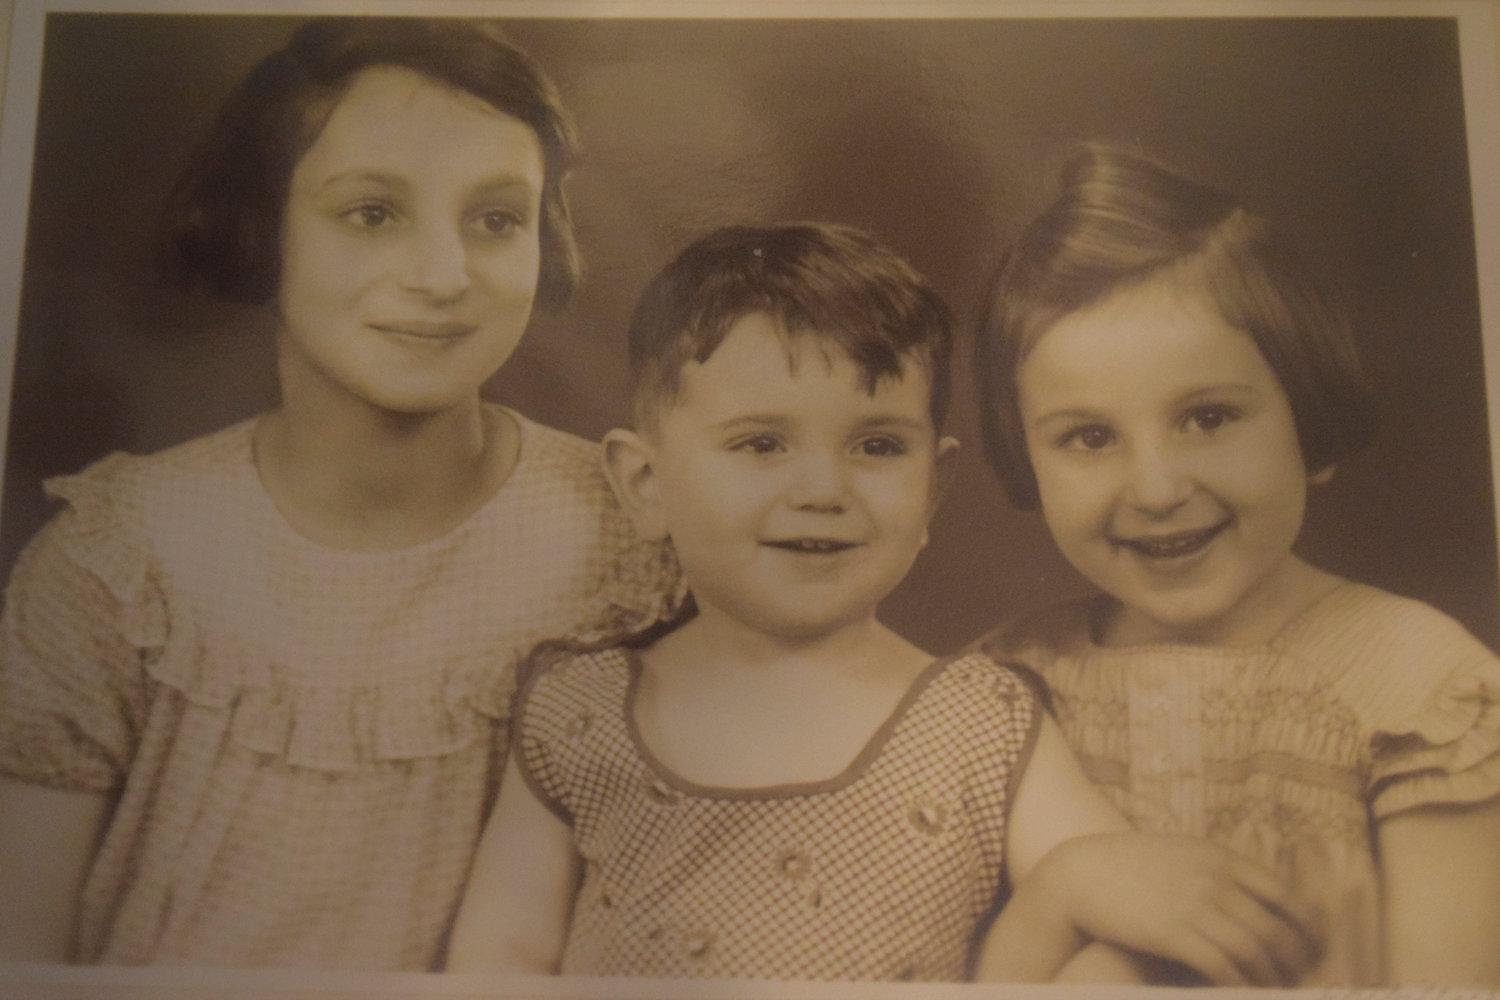 The Bergs left Germany and went to Kenya in 1939. From left were Inge Berg, 9, her cousin Egon, 2, and her sister Jill, 6, that year.